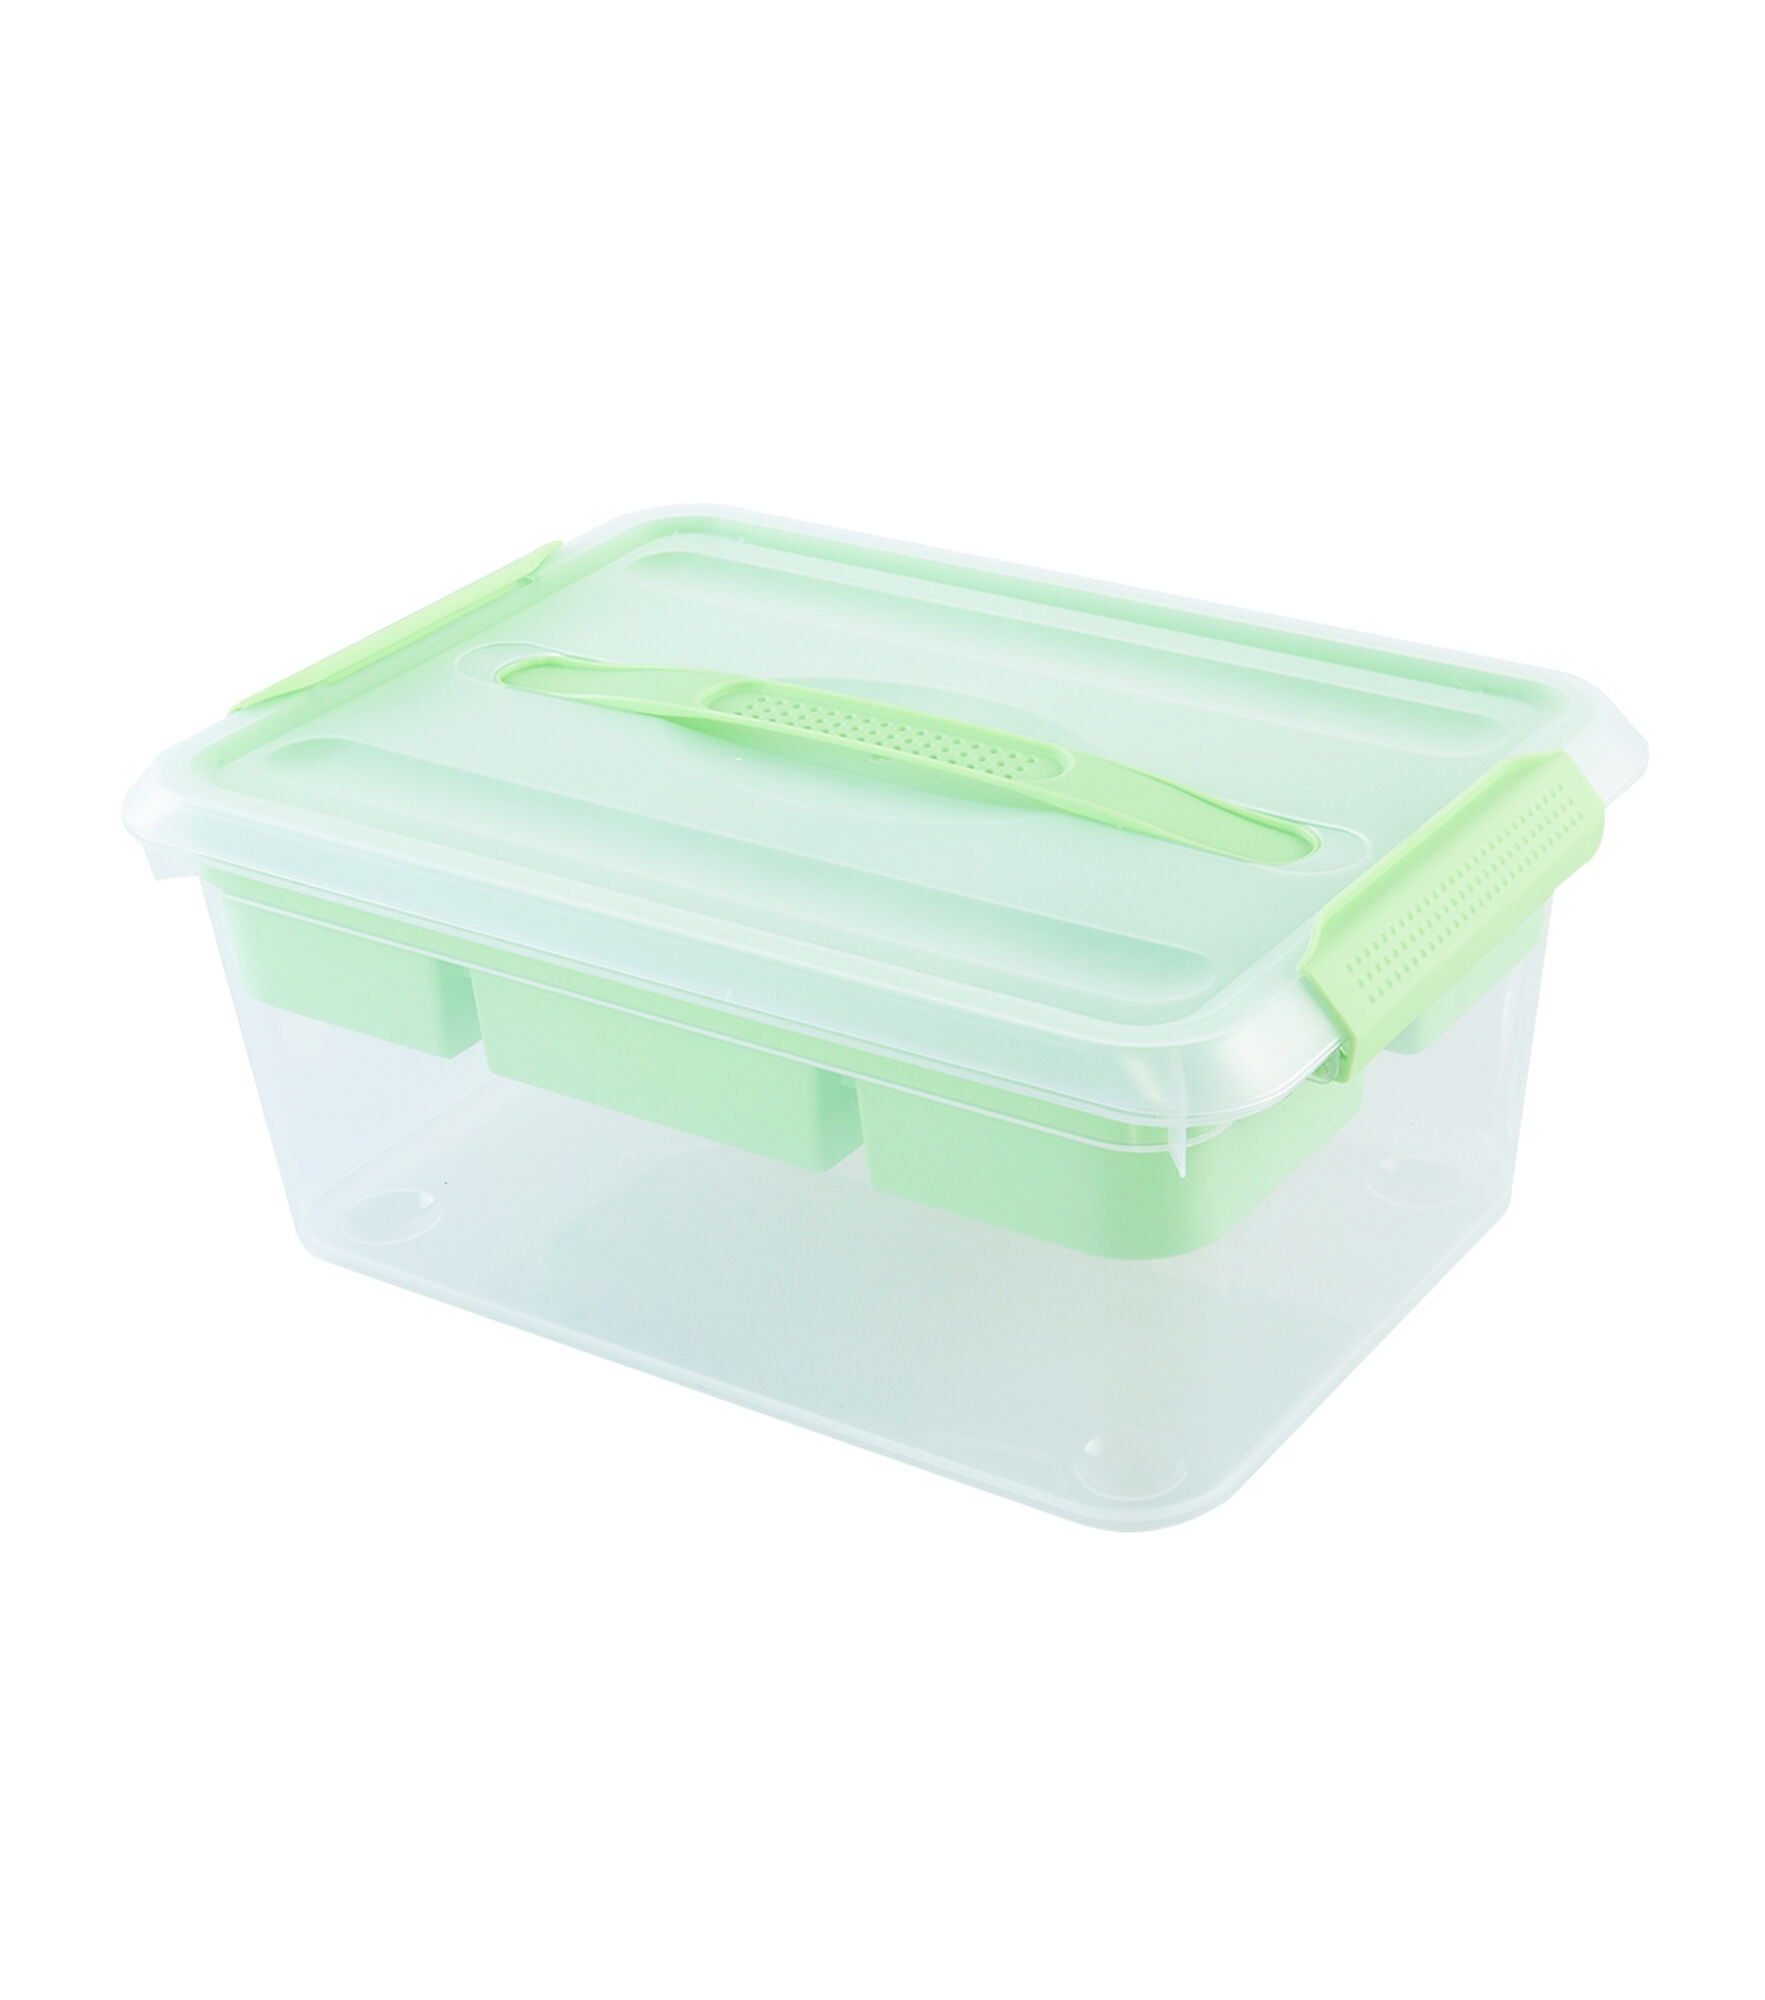 7" x 16" Latchmate Plastic Storage Bin With Compartments by Top Notch, Green, hi-res